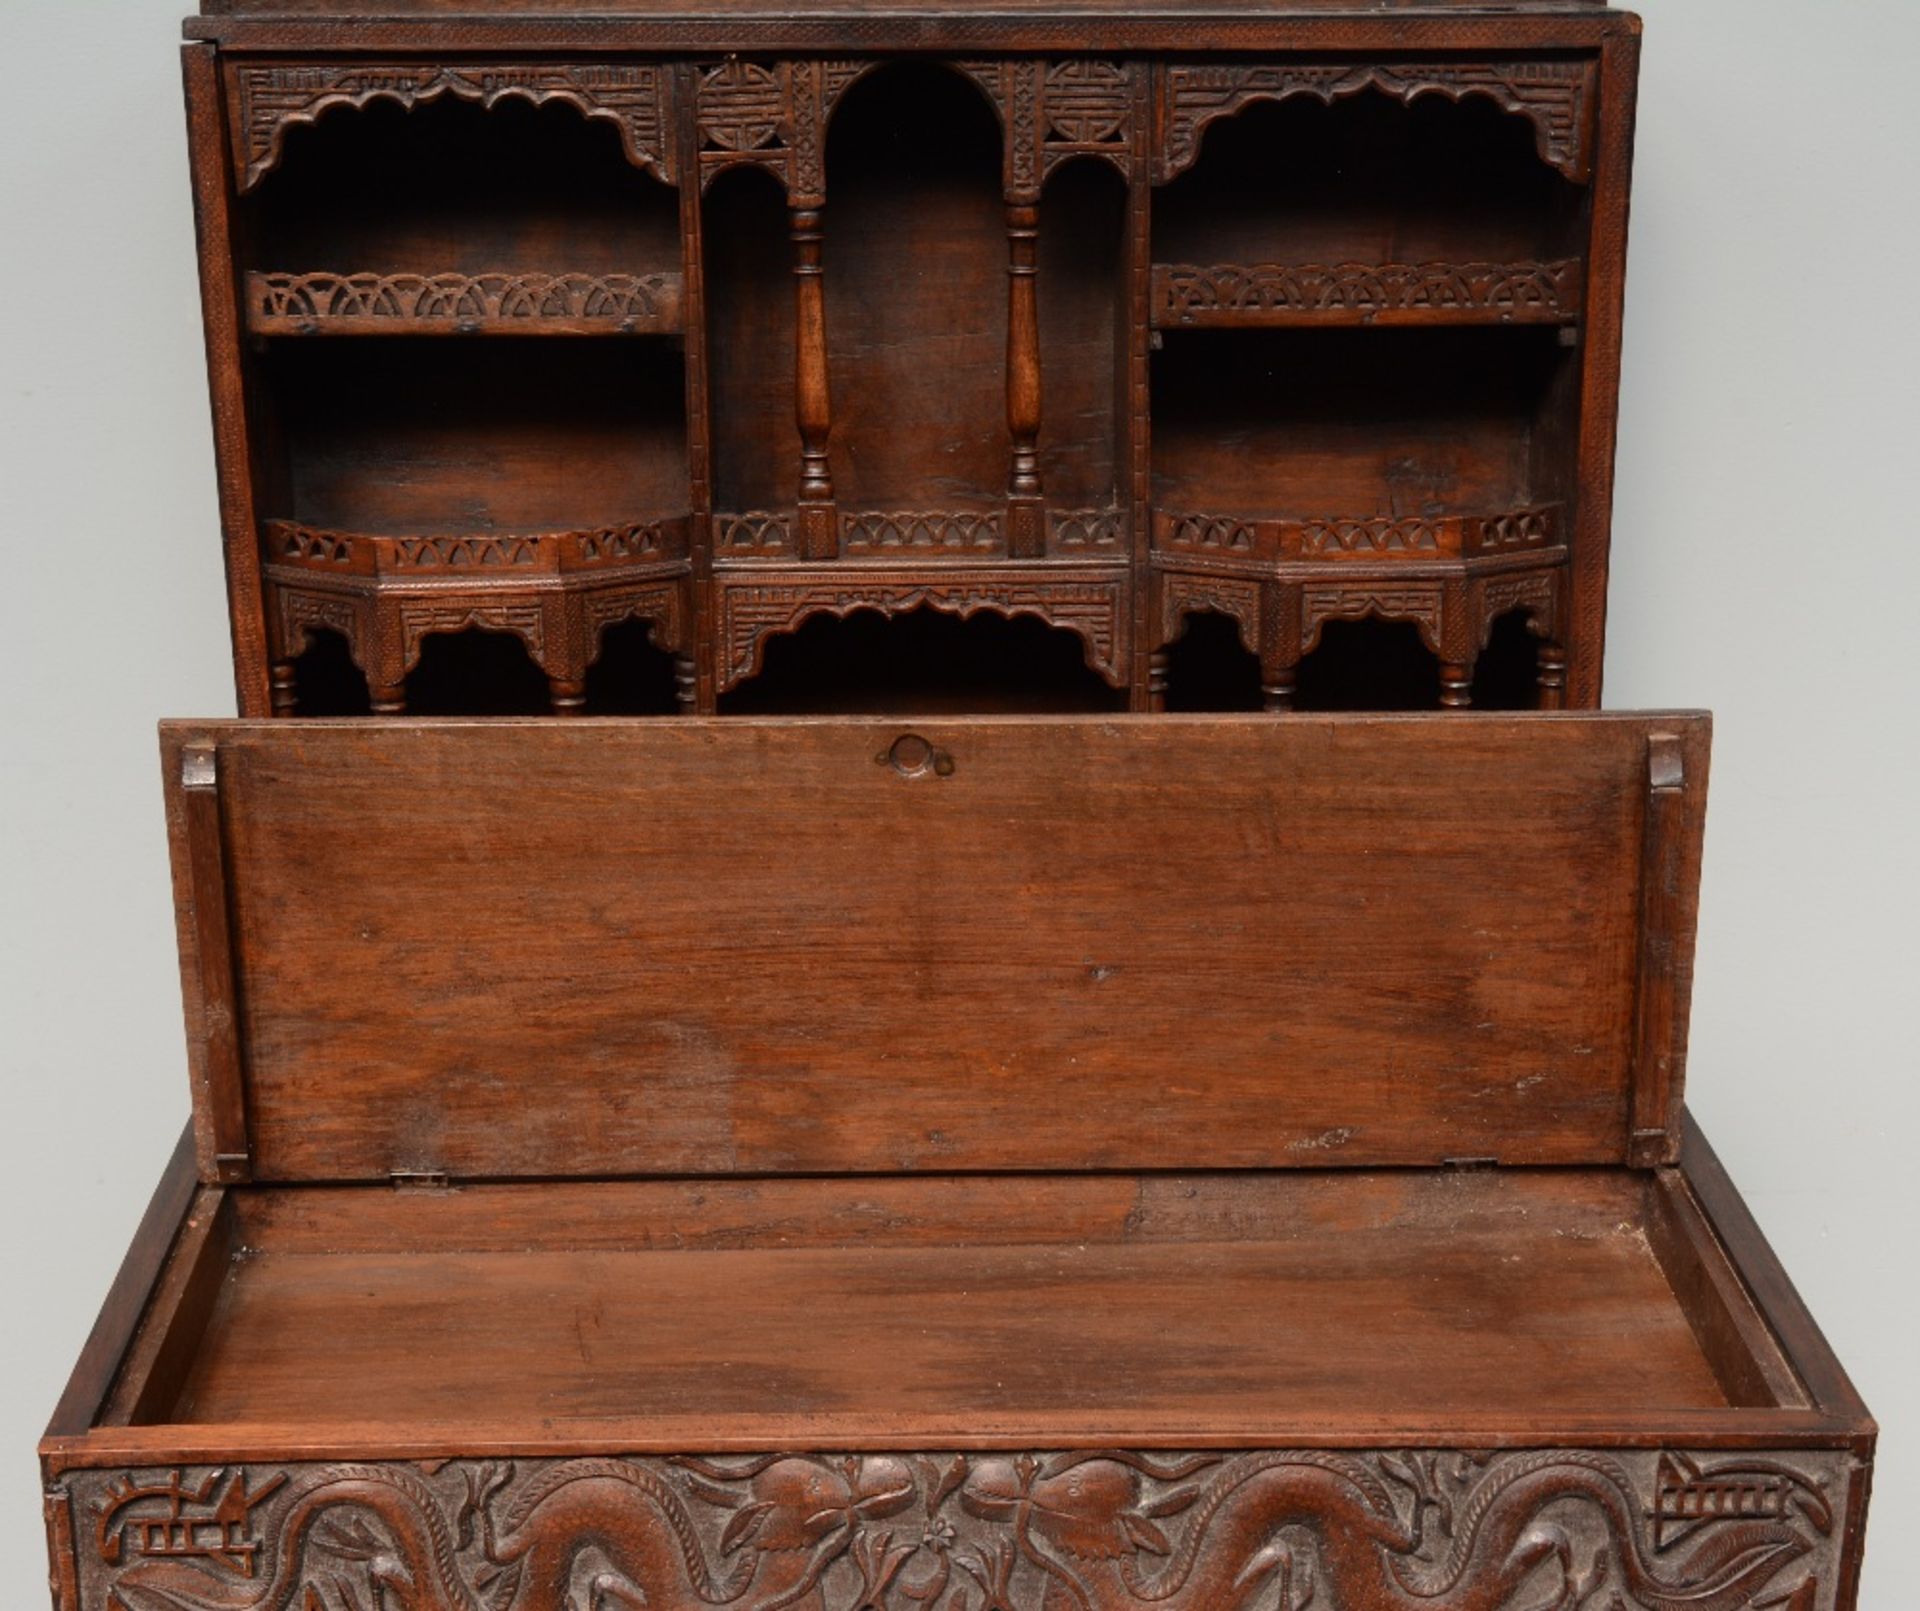 A Chinese carved hardwood travelling desk, relief decorated with dragons and symbols, H 83 - D - Bild 3 aus 8